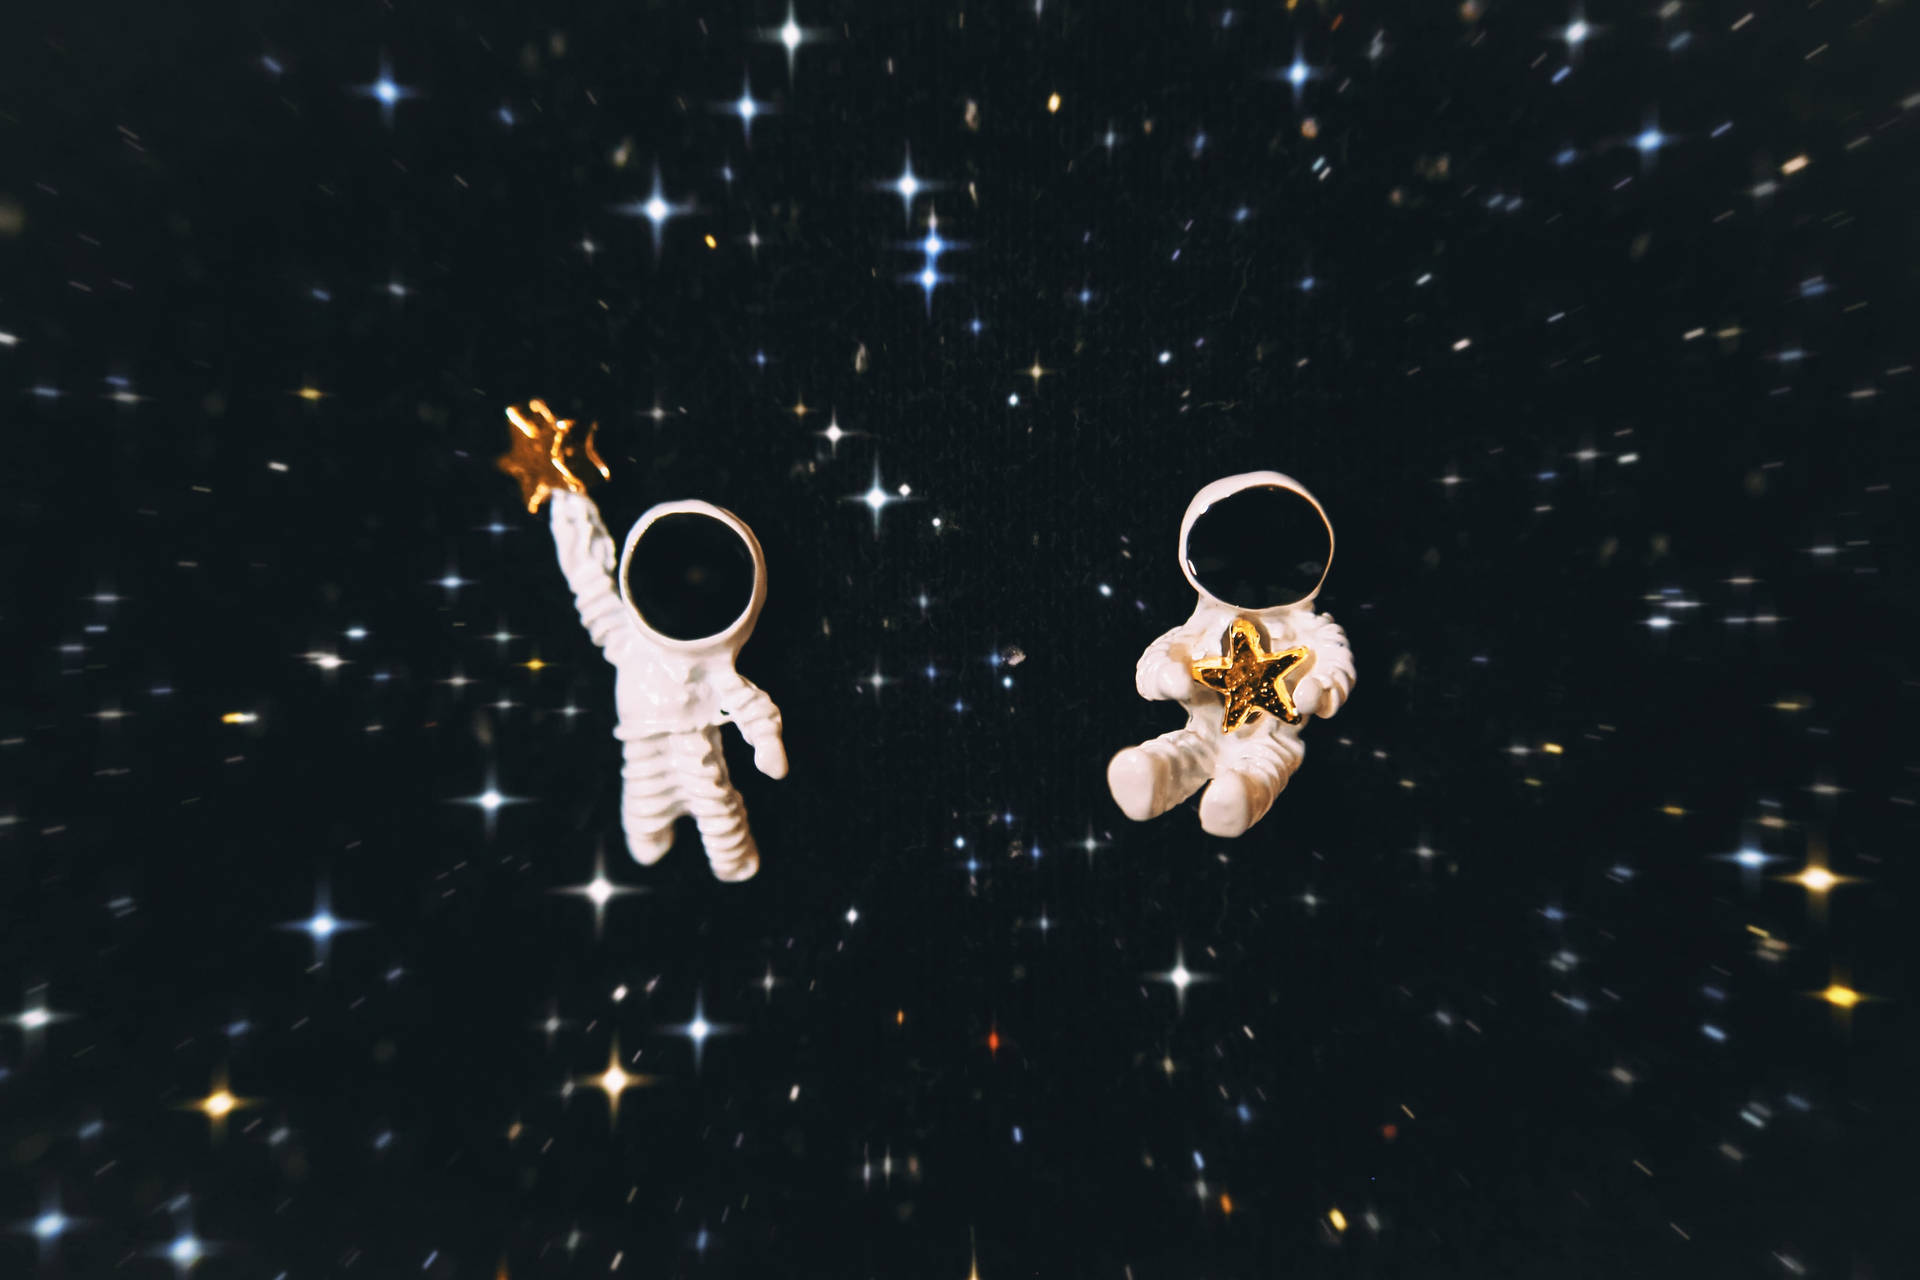 Top 999+ 4k Astronaut Wallpaper Full HD, 4K✅Free to Use